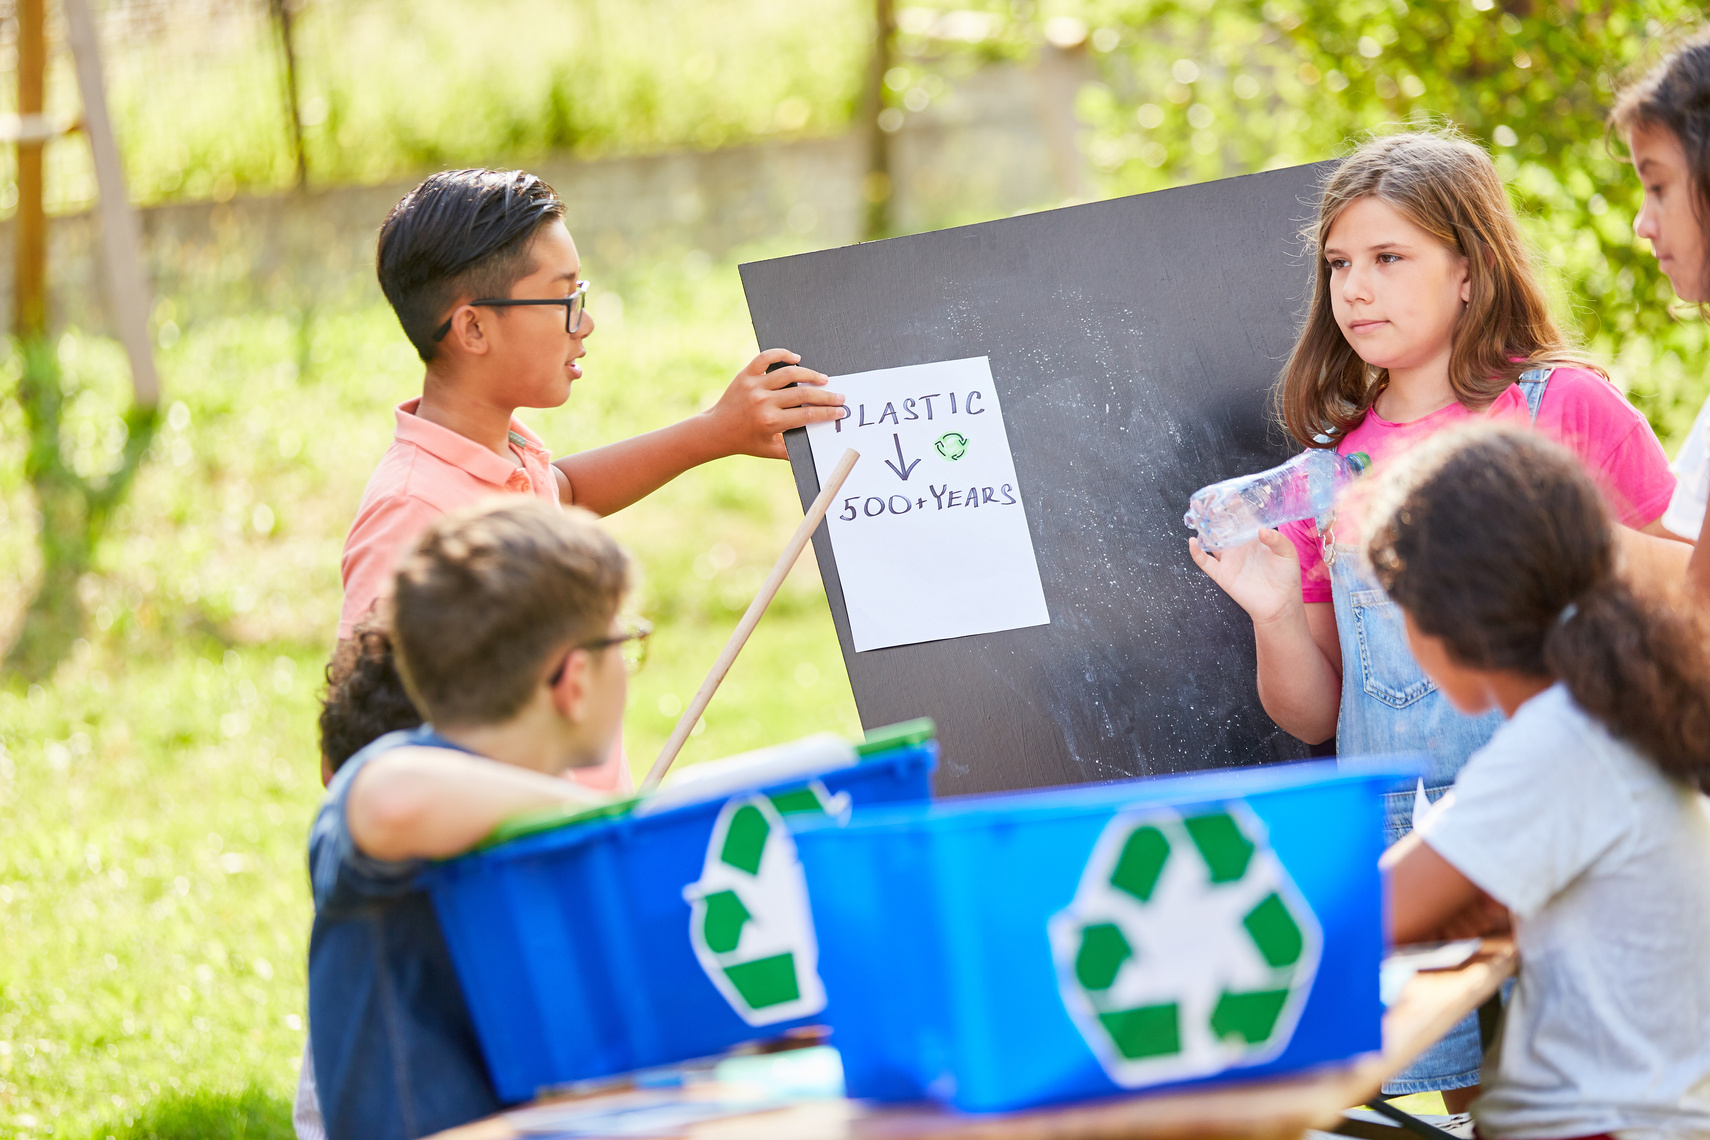 Children Learn about Recycling and Plastic Waste